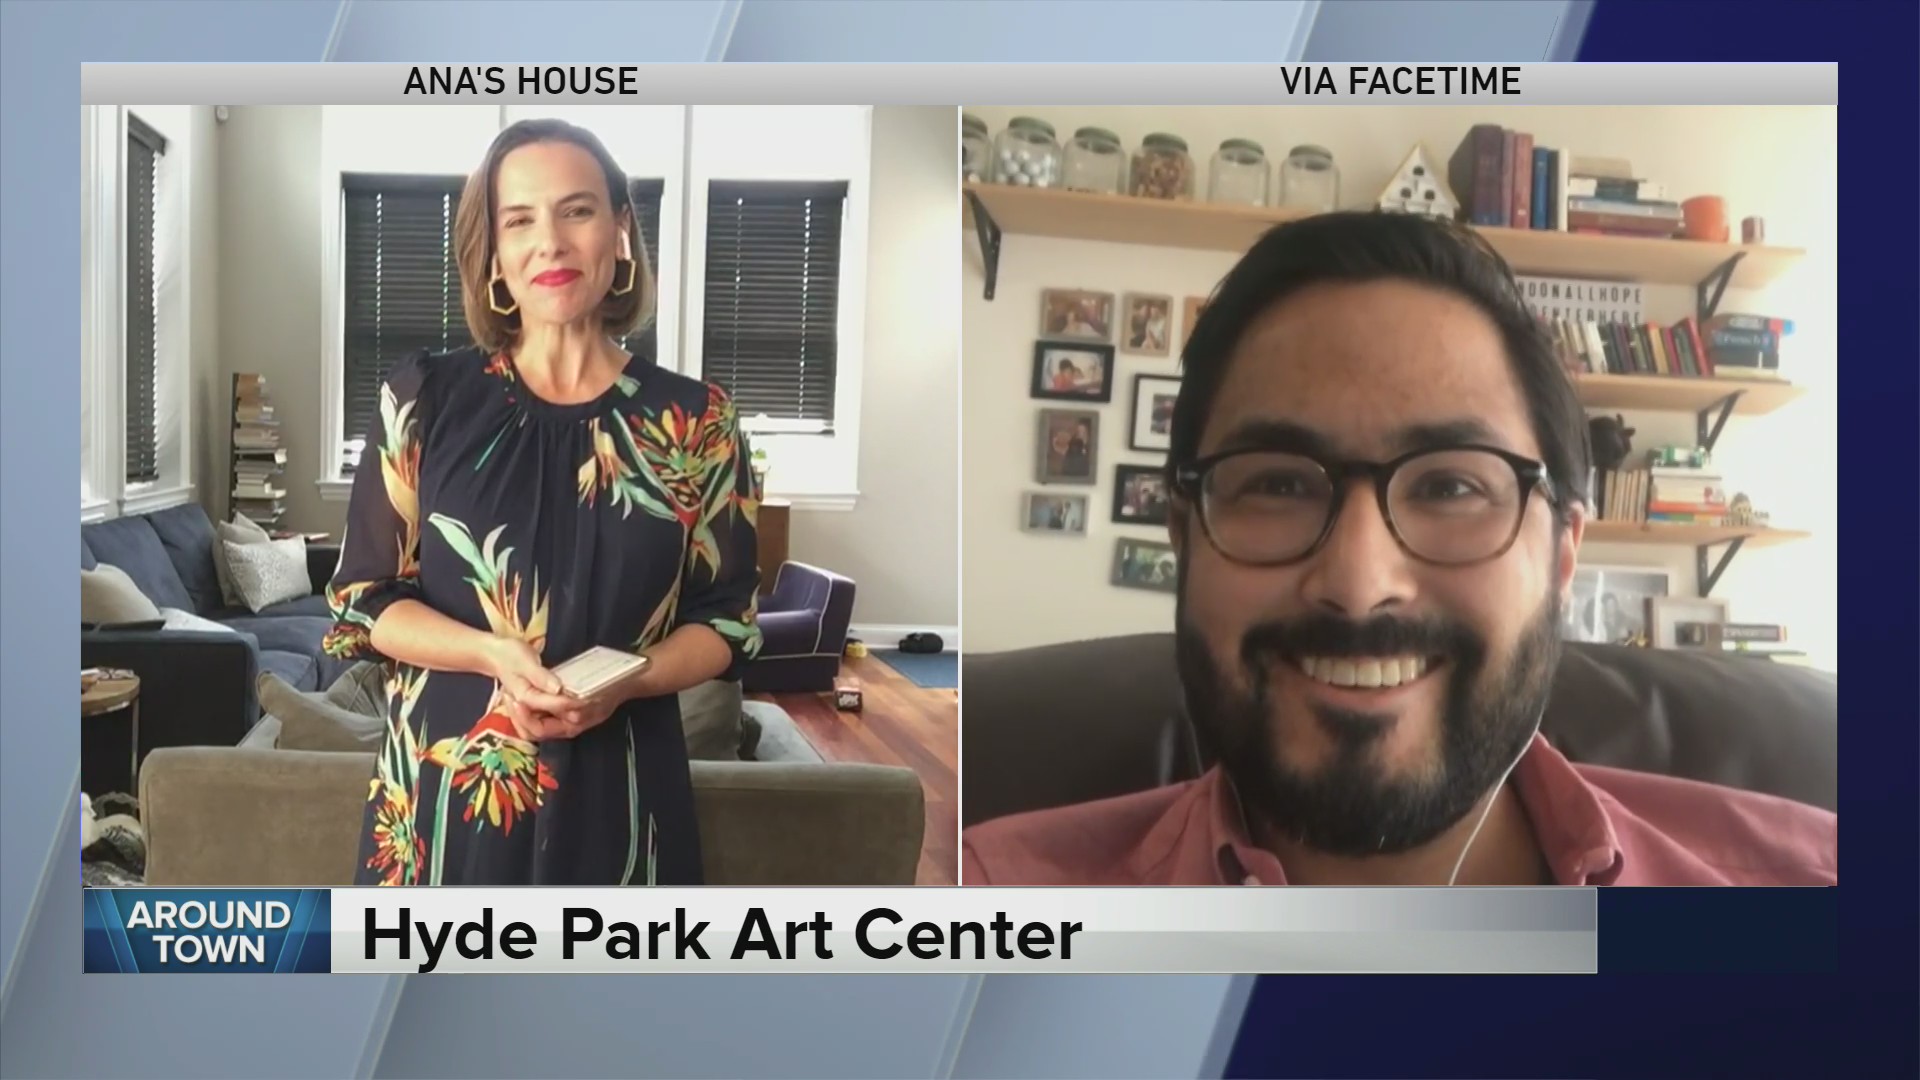 Around ‘The House’ checks in with Hyde Park Art Center and Evanston Art Connects